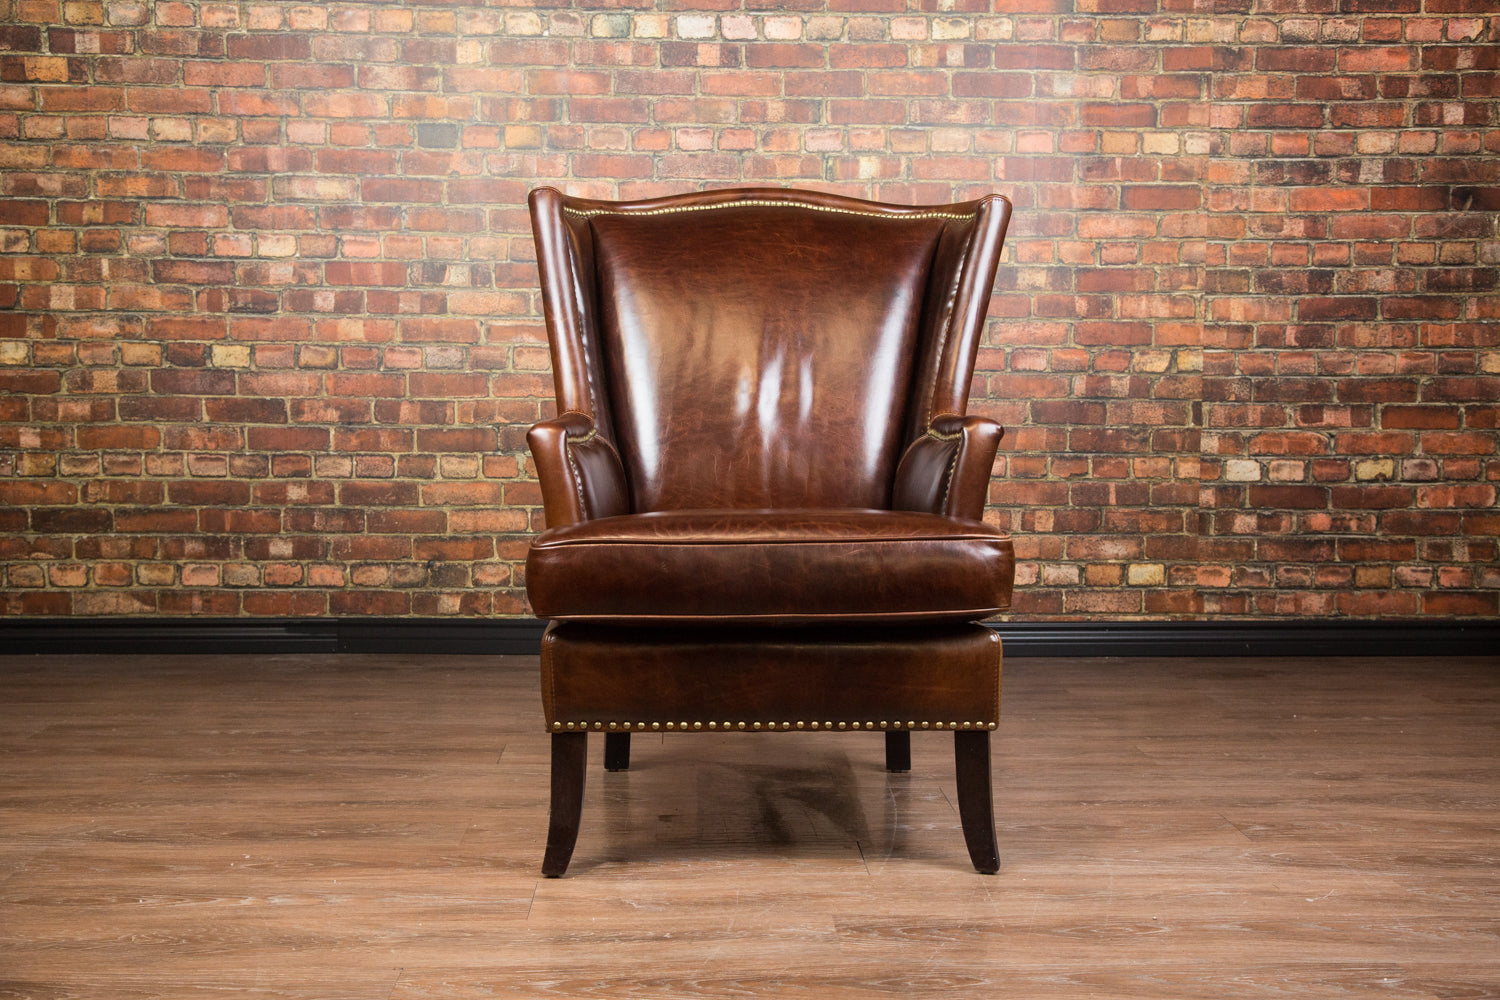 THE MANOR LEATHER CHAIR